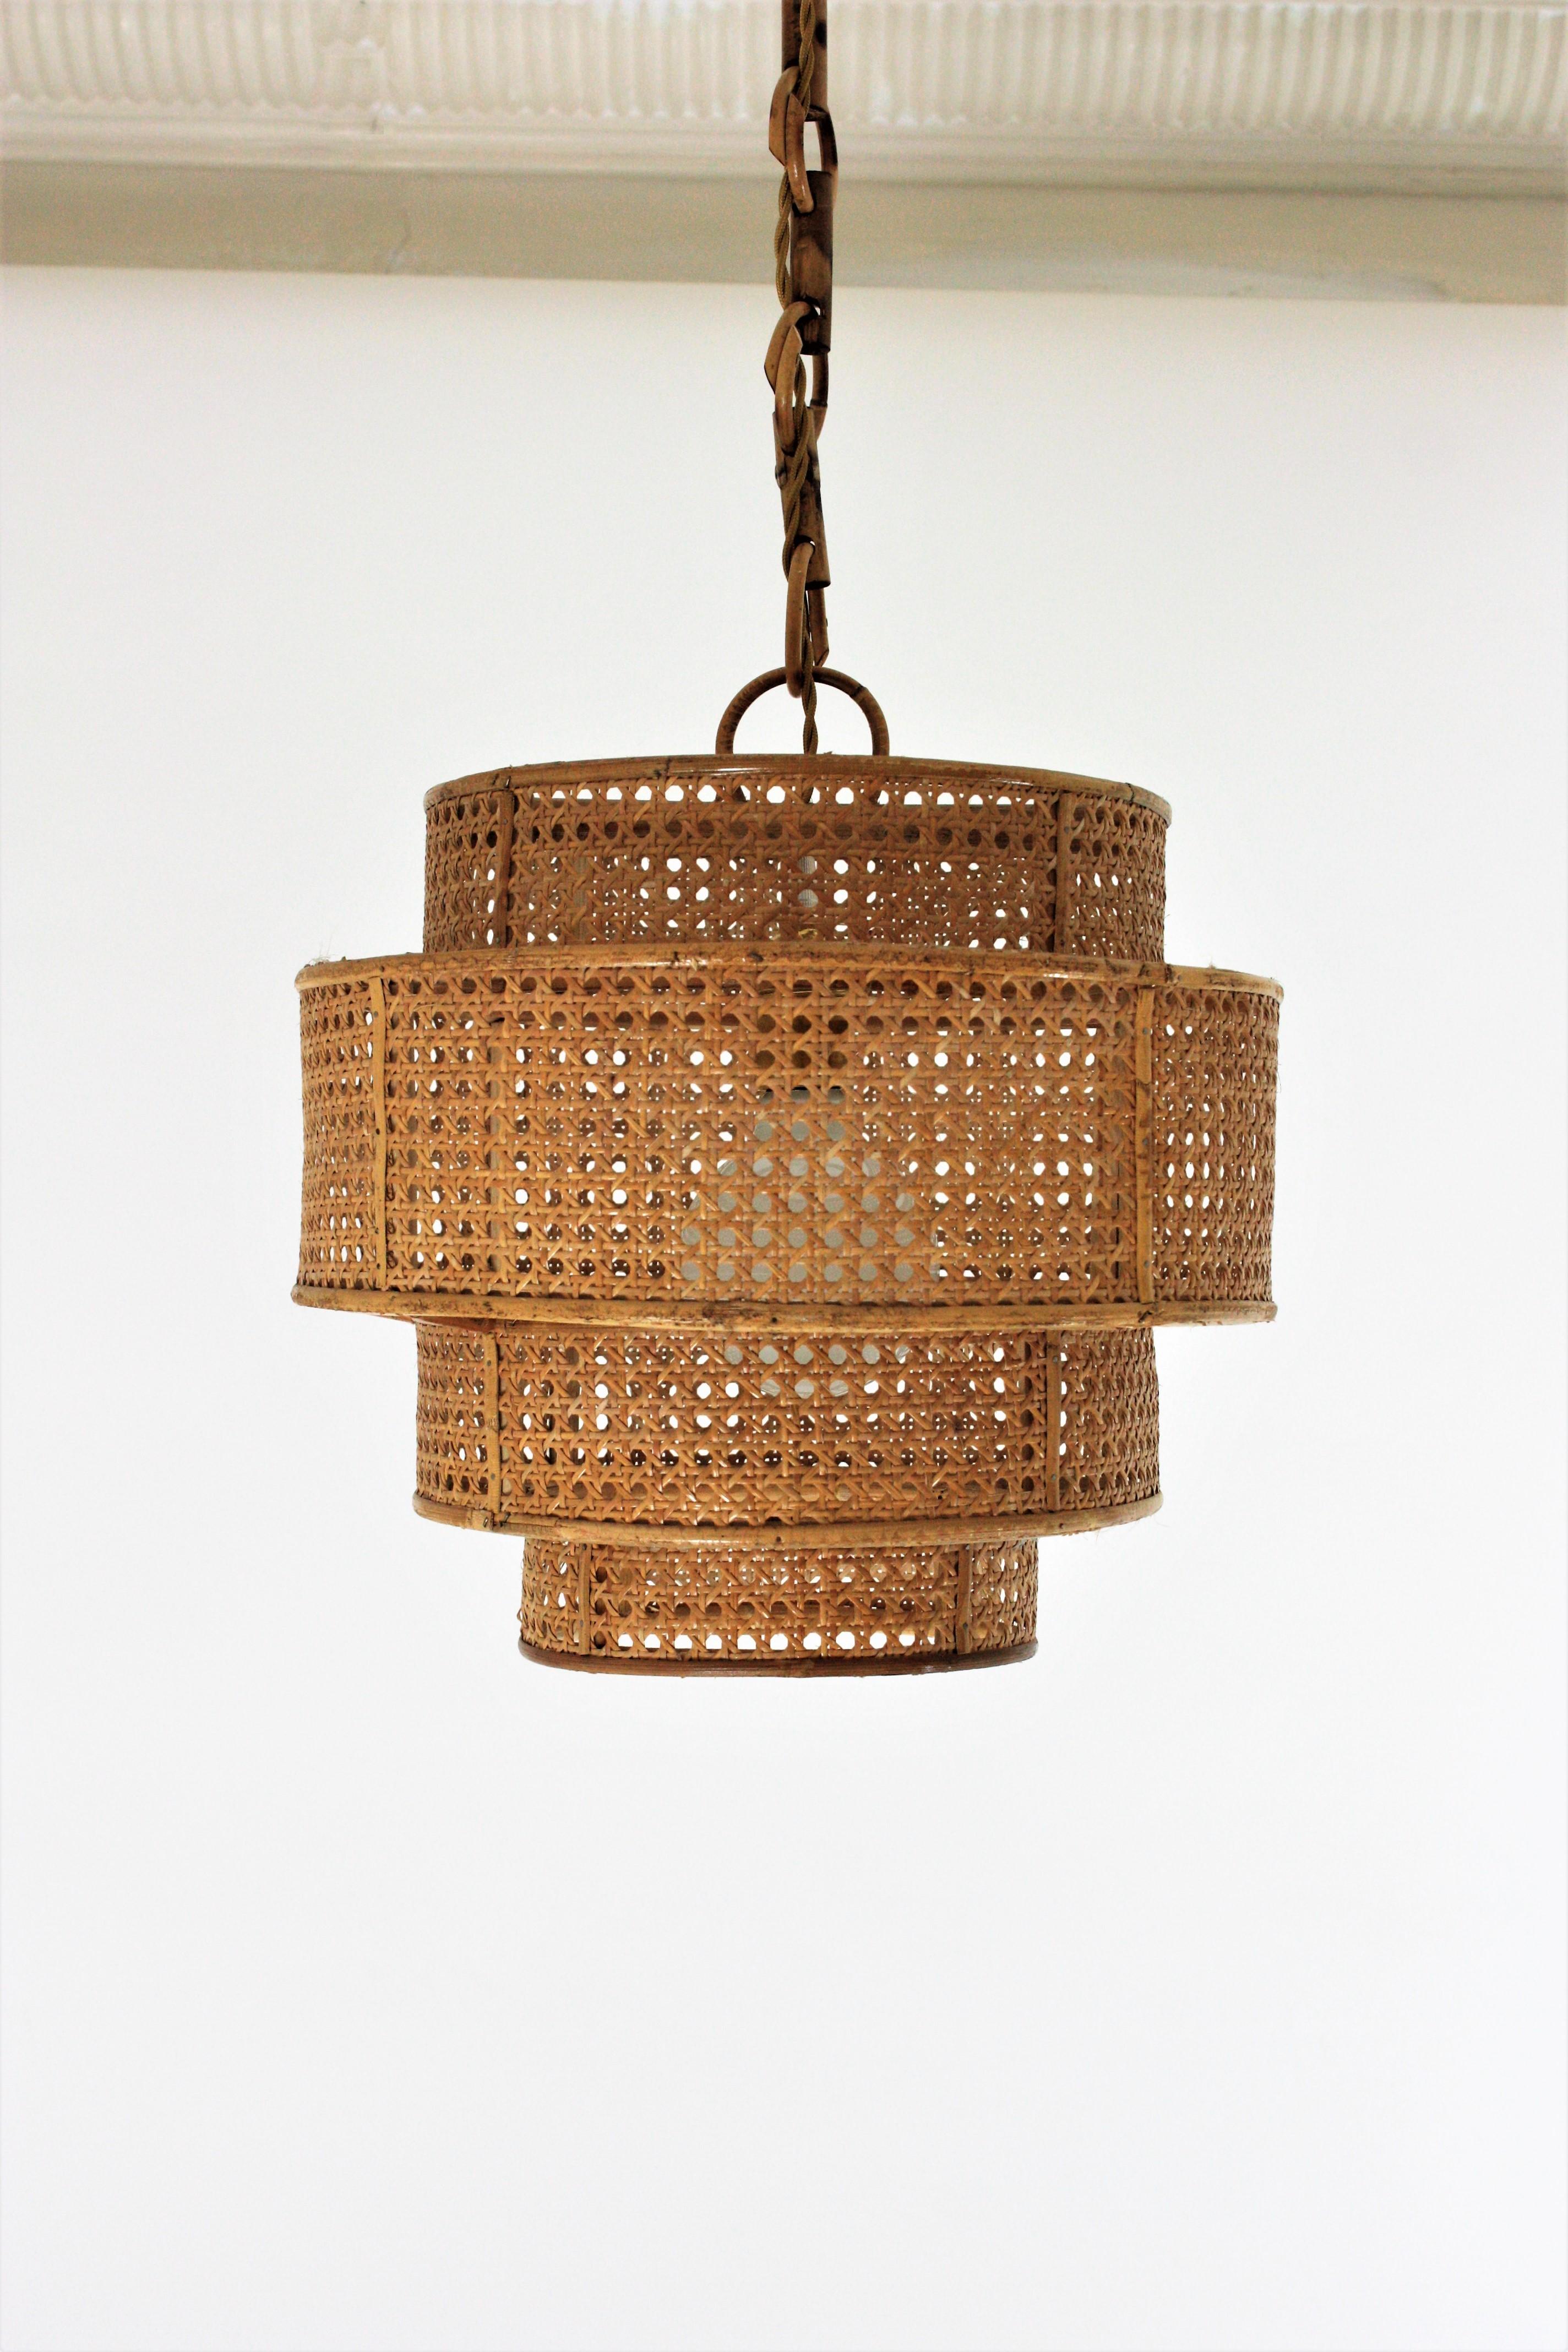  Rattan Wicker Weave Concentric Cylinder Pendant Hanging Light  For Sale 3